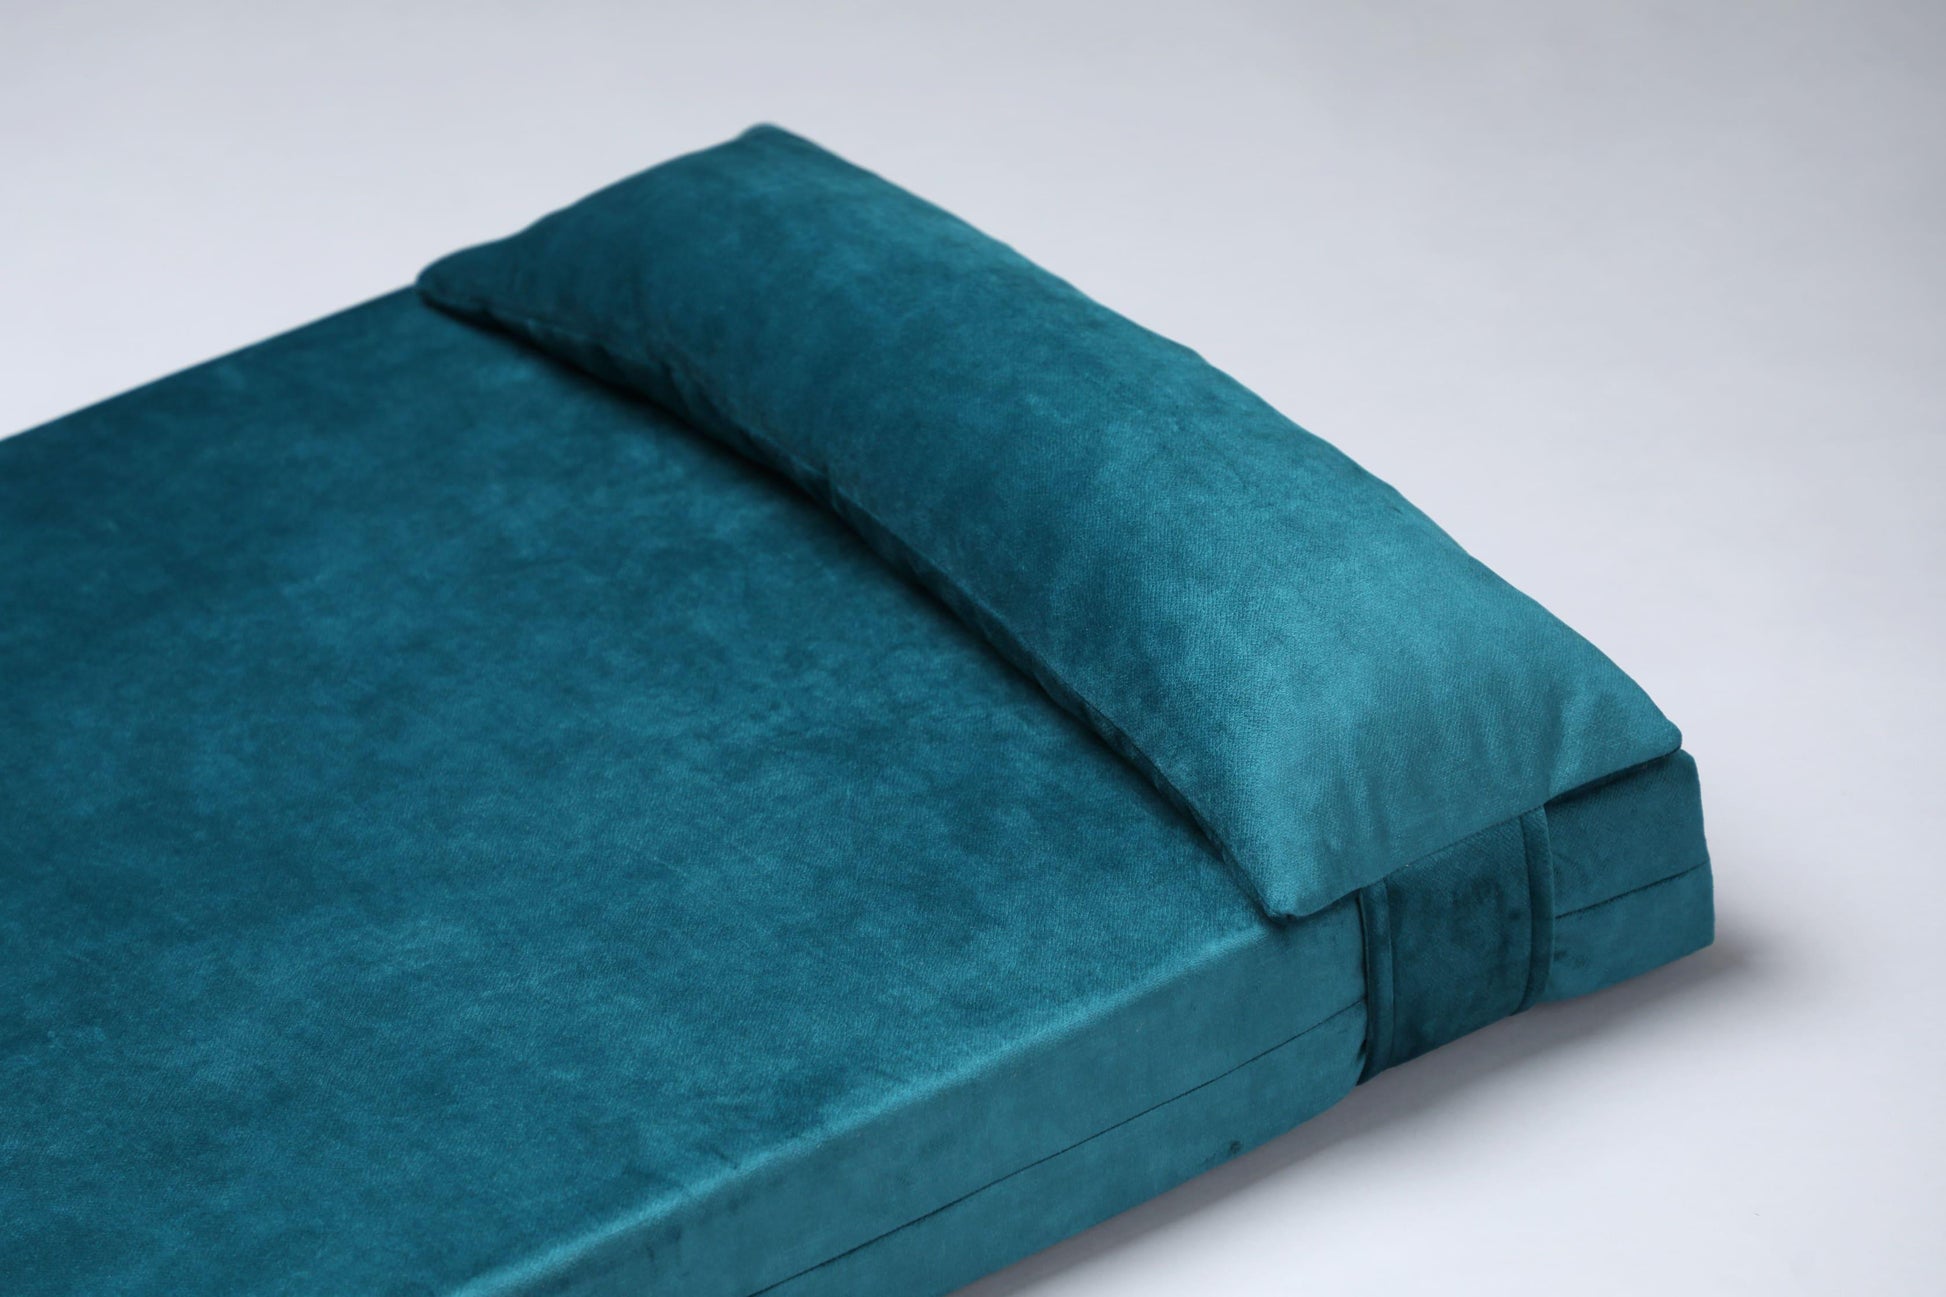 XXL only | 2-sided extra large & supportive dog bed. OCEAN BLUE - premium dog goods handmade in Europe by animalistus